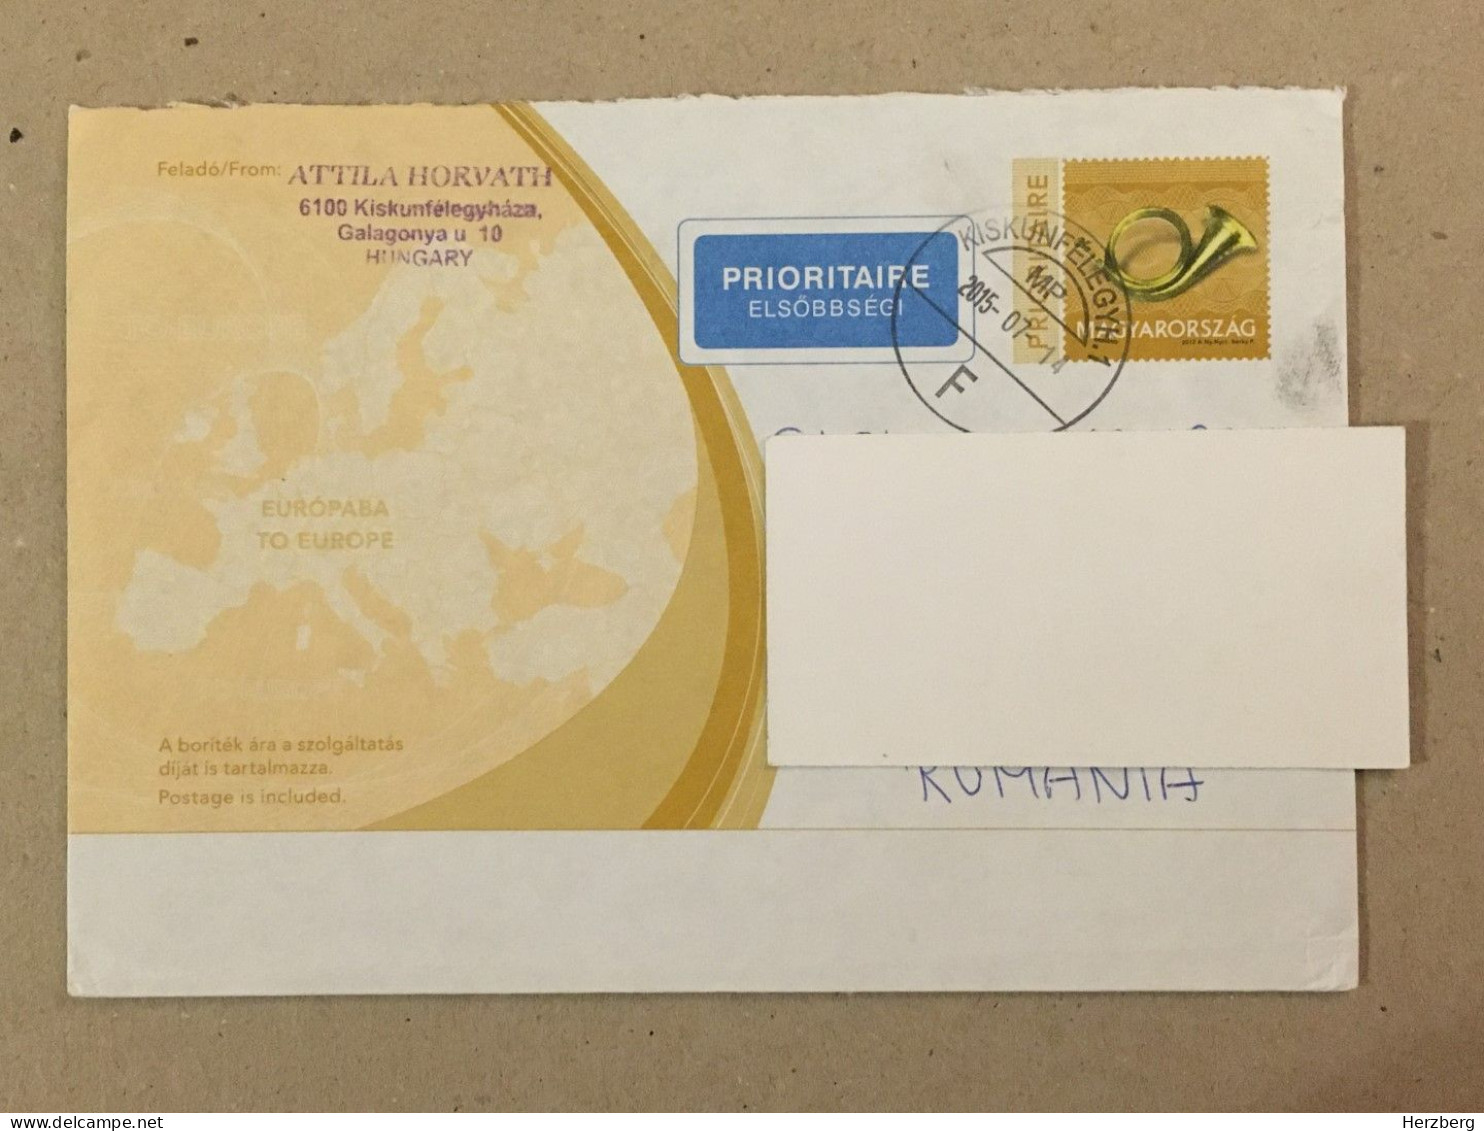 Hungary Magyarorszag Used Letter Stamp Circulated Cover Postal Stationery Entier Postal Ganzsachen 2015 - Covers & Documents